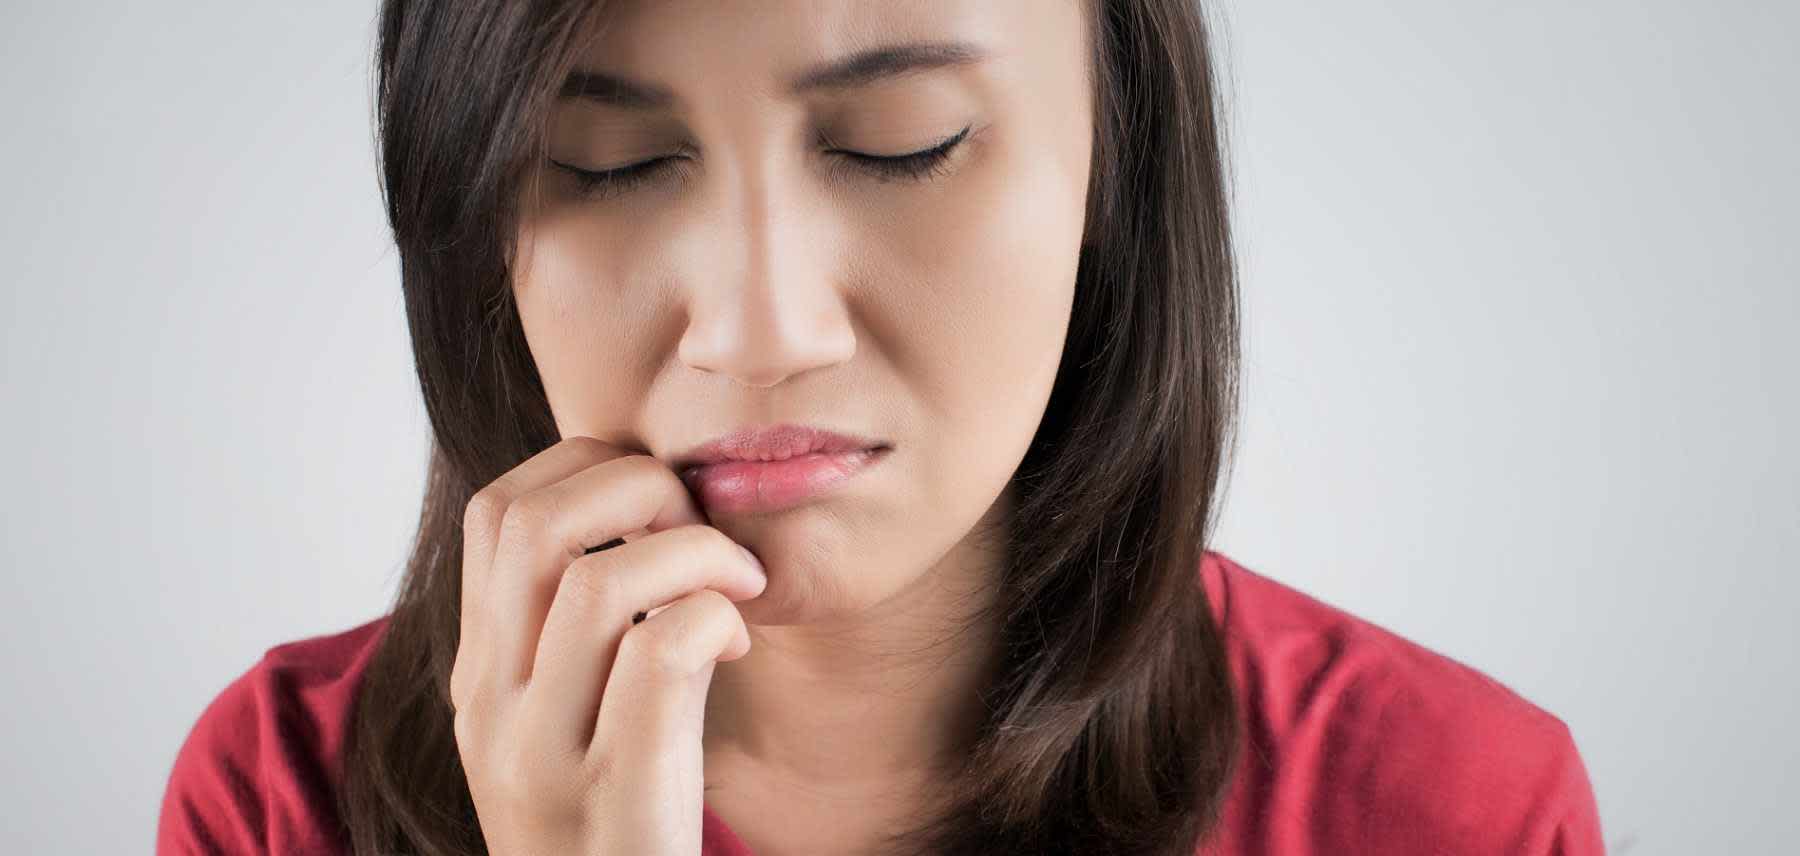 Young woman with painful sore wondering what causes mouth sores